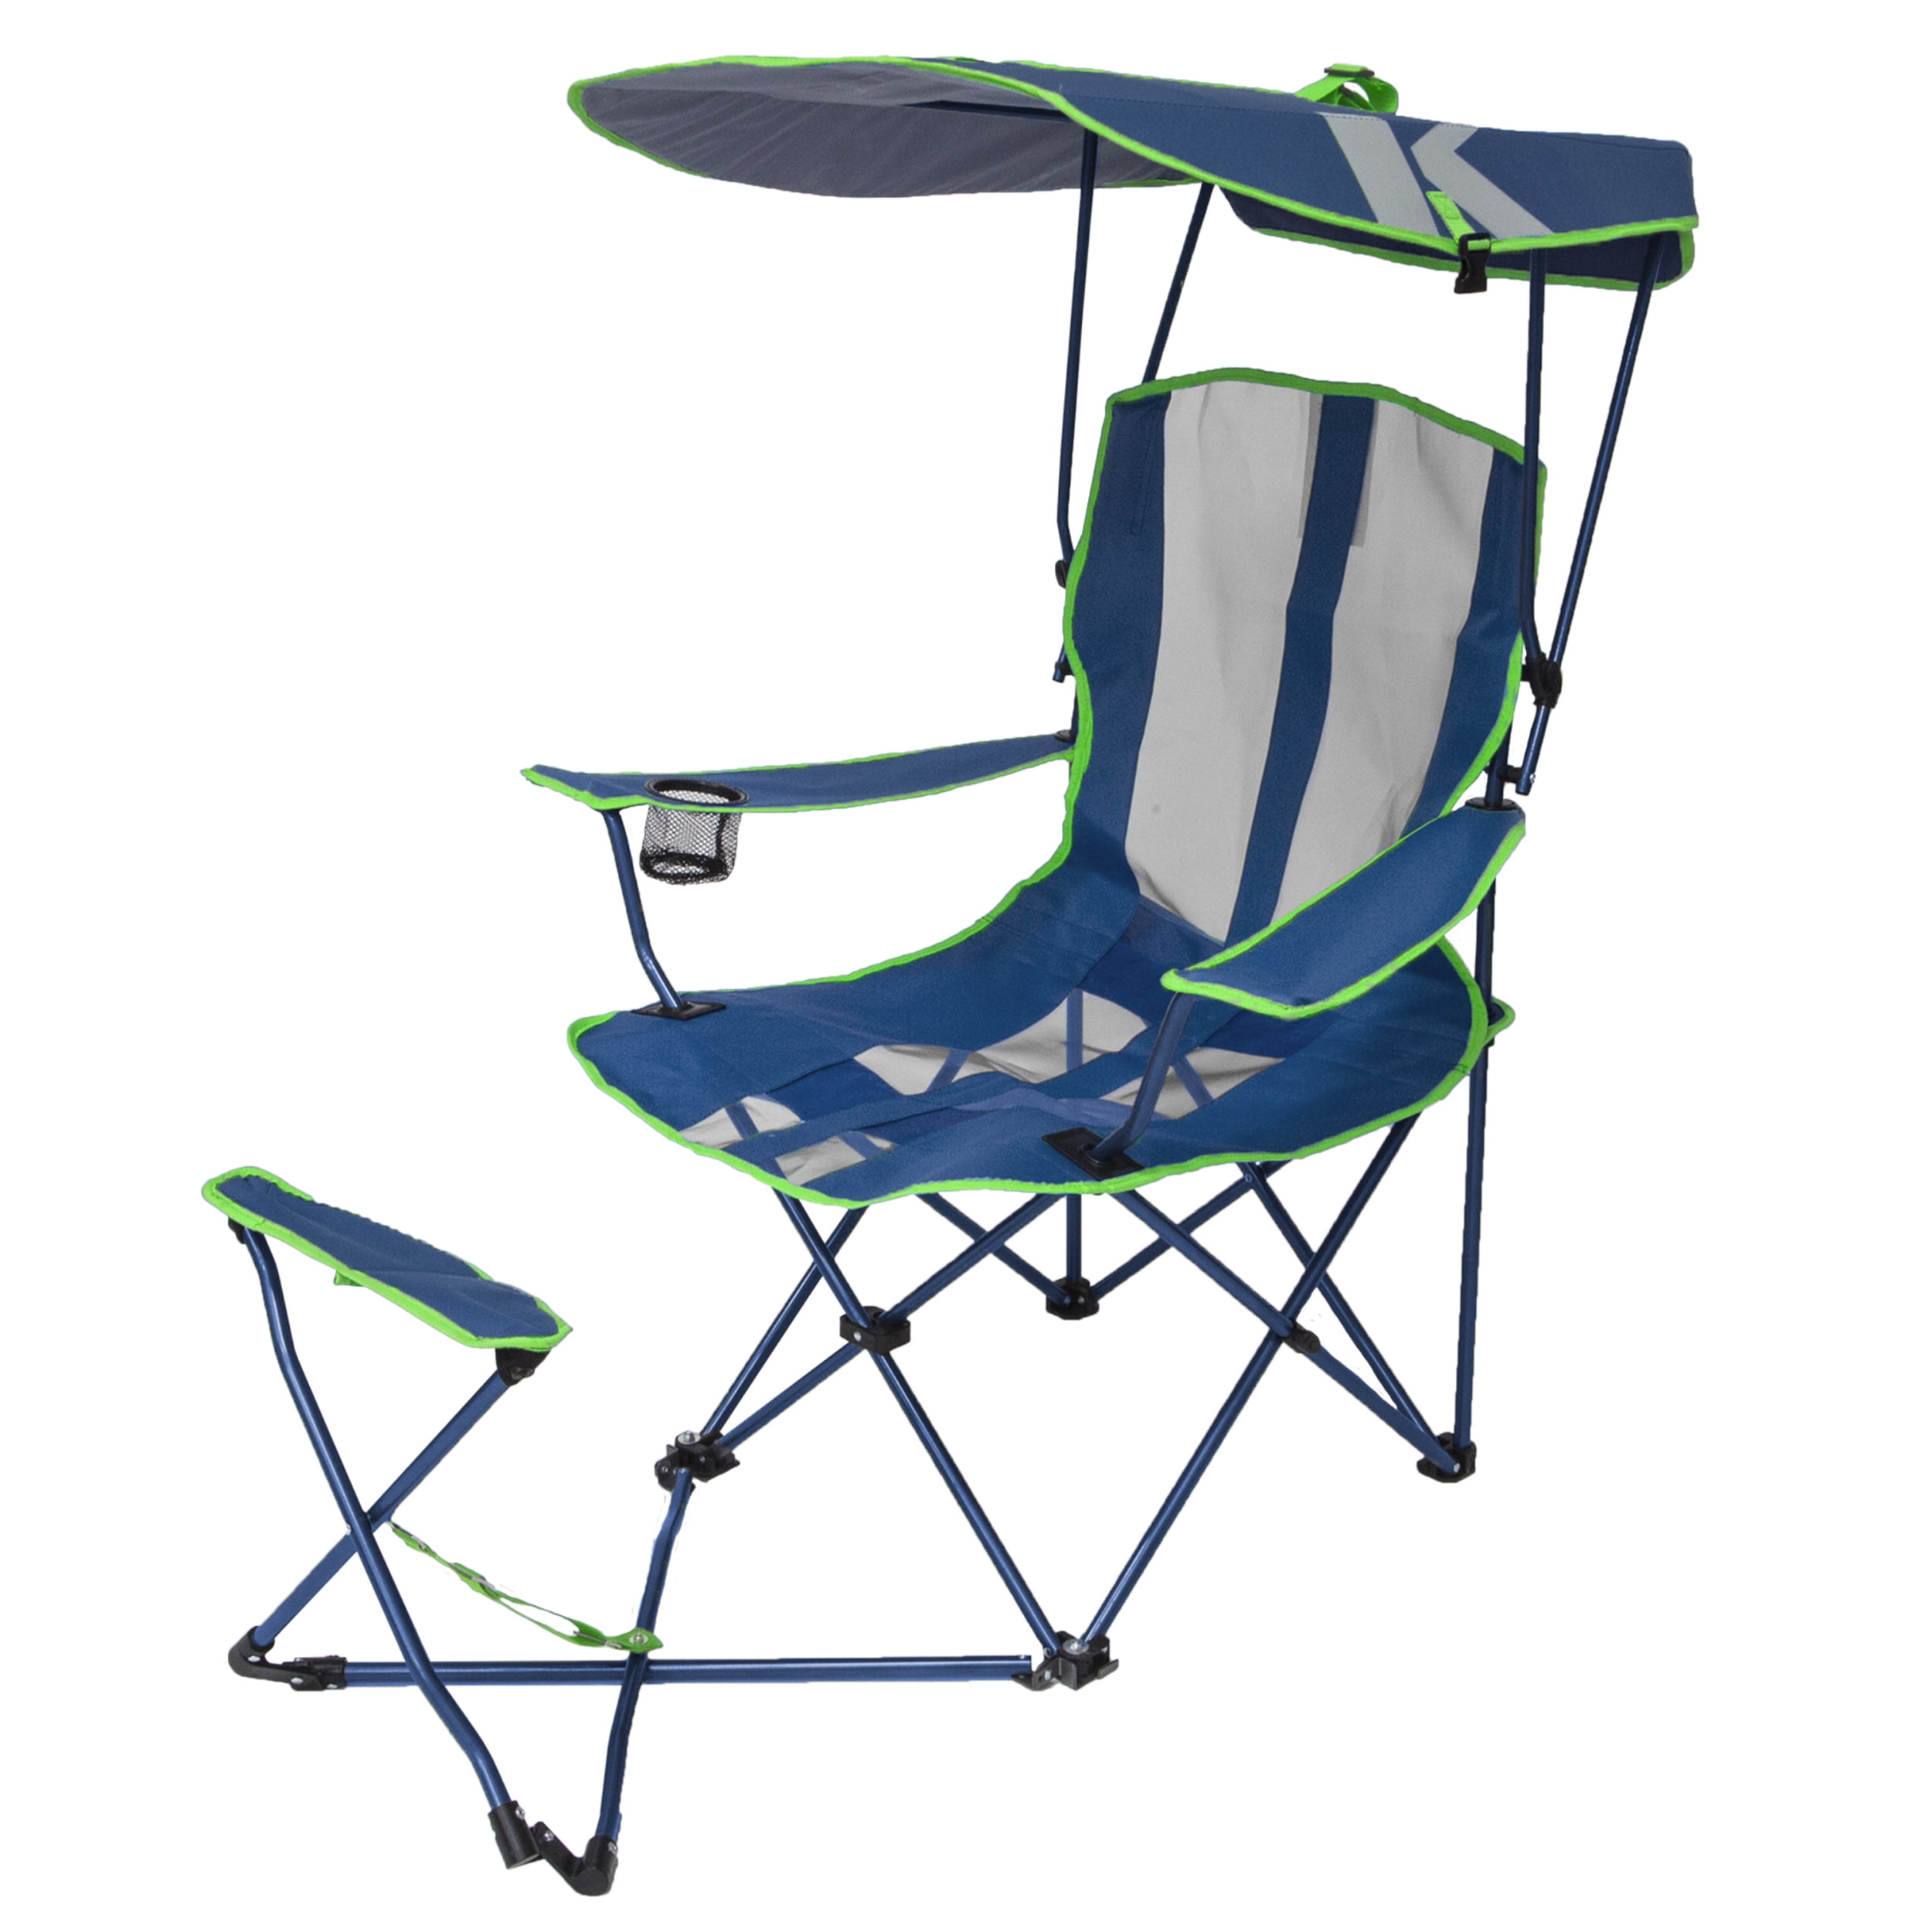 Kelsyus Original Canopy Chair with 